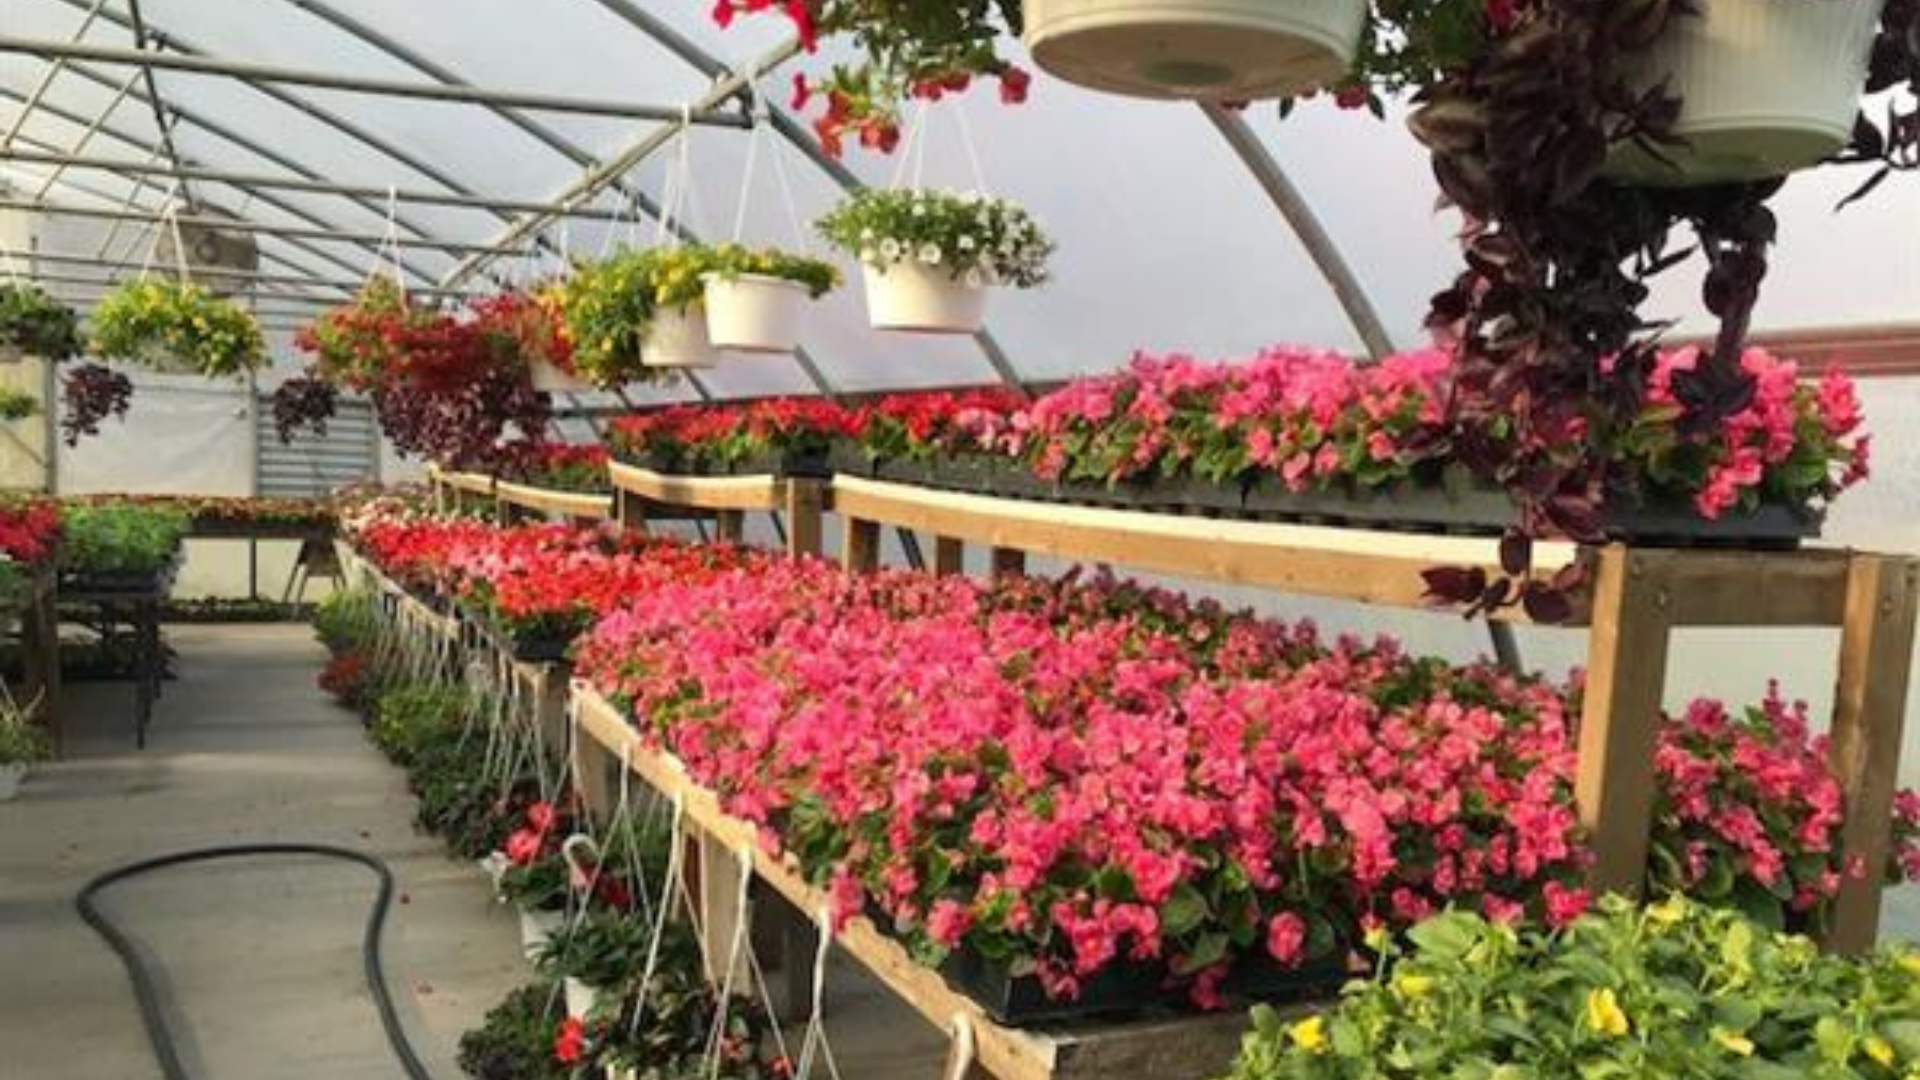 Photo of pink flower flats and hanging baskets in greenhouse.